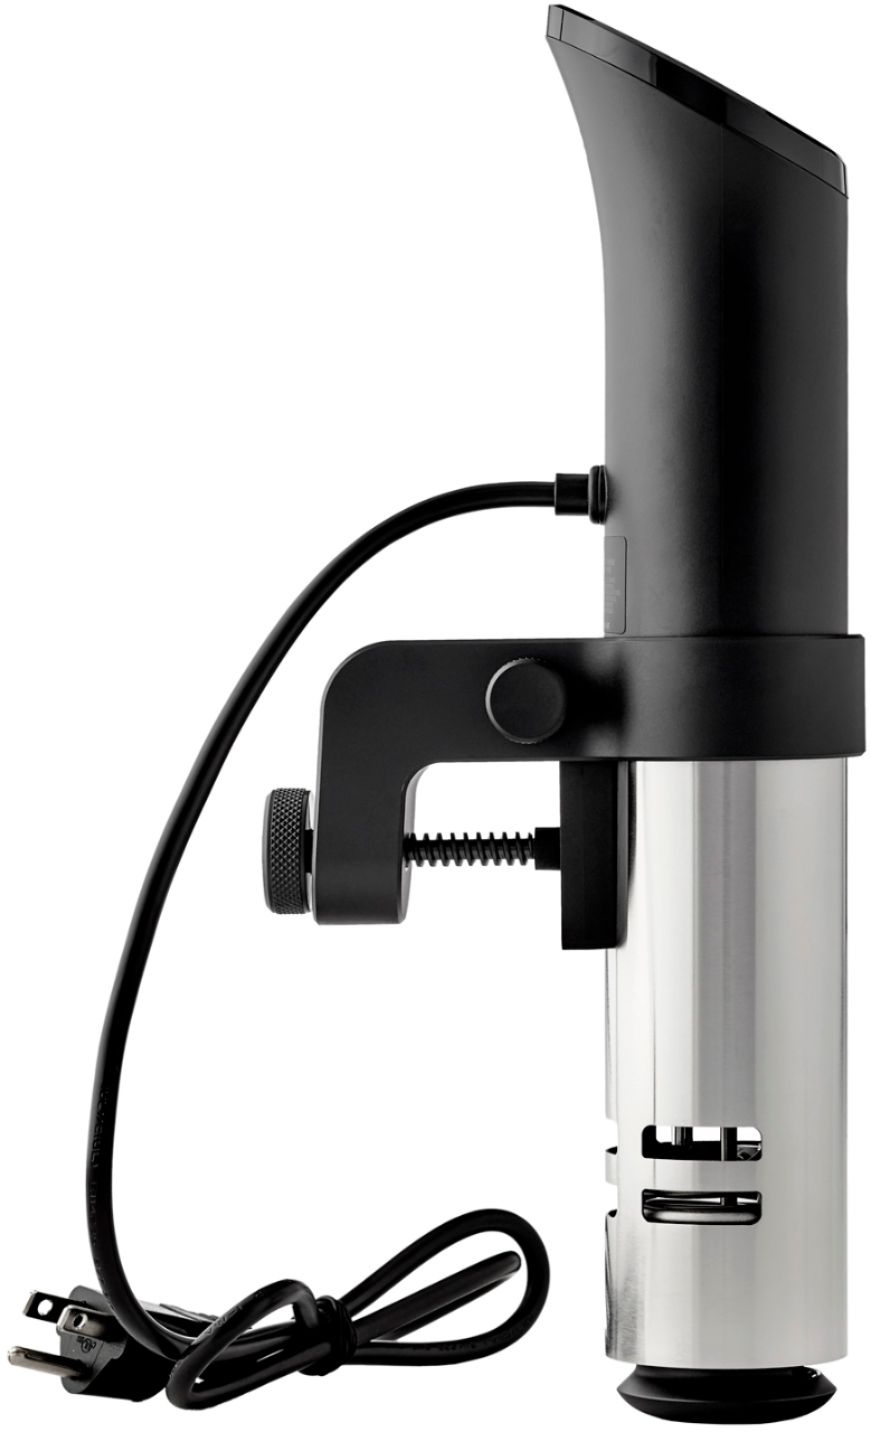 Anova 1000W Black/Silver Precision Cooker for sale online AN500-US00 